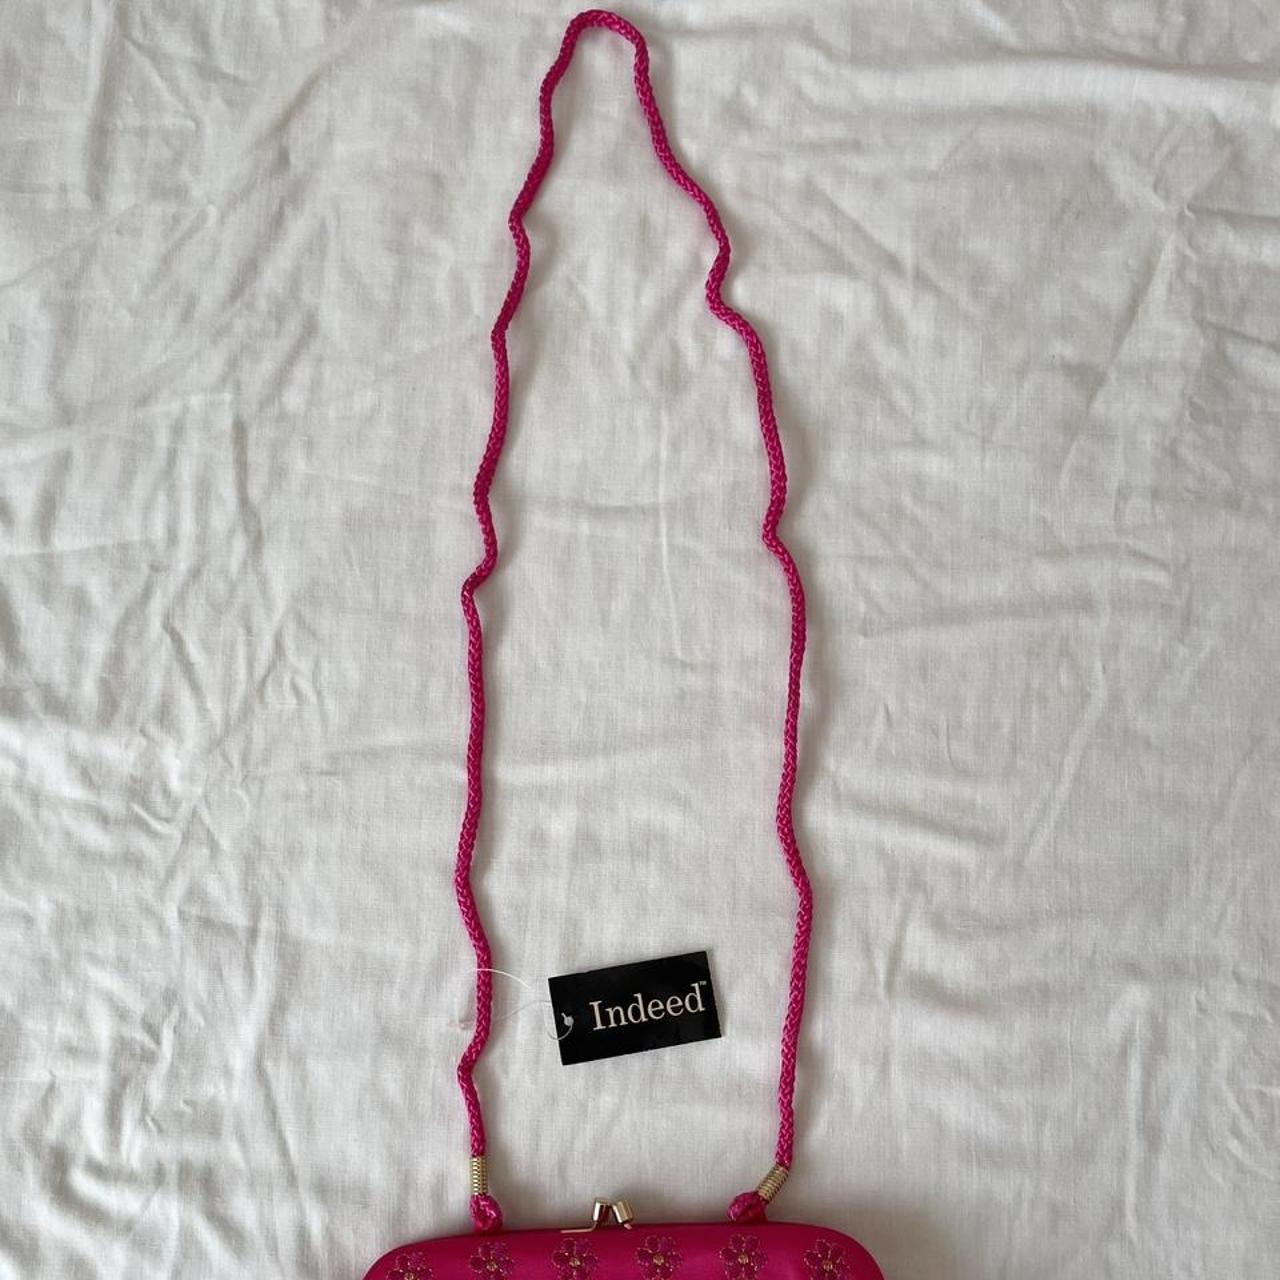 Product Image 2 - Embroidered hot pink satin clutch